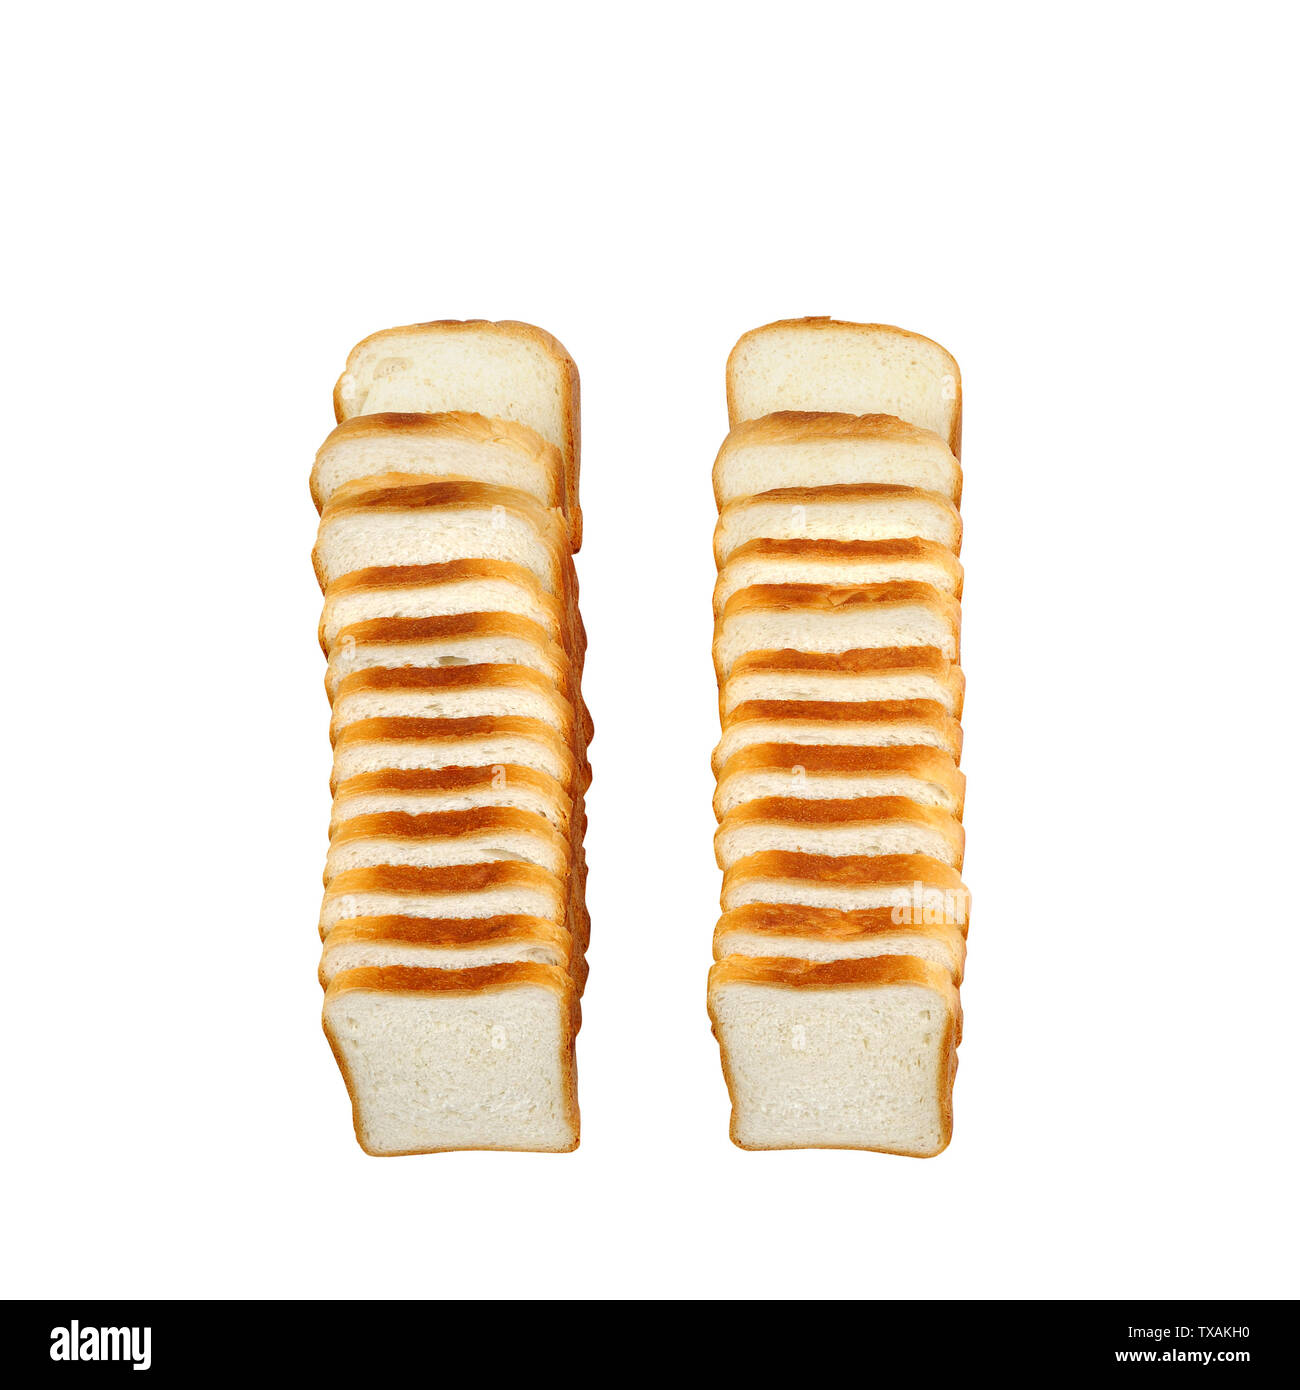 Toast wheat bread sliced isolated on white background. Image of cut  loaf white  bread.Food concept.Bread on white background. Stock Photo